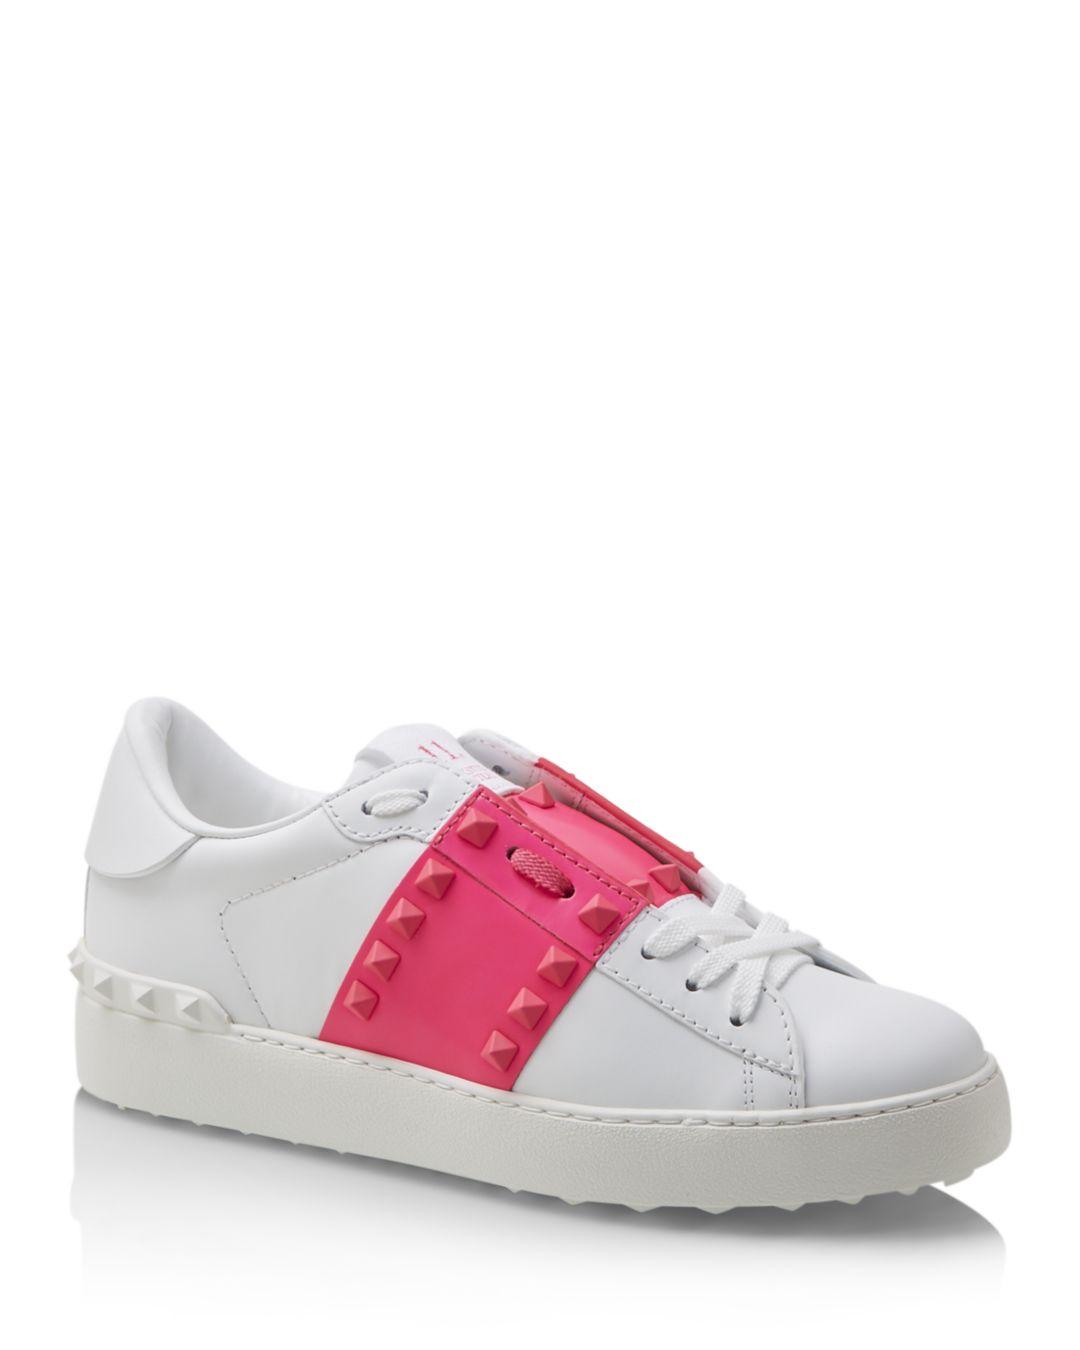 Leather Rockstud Untitled Sneakers in Pink -